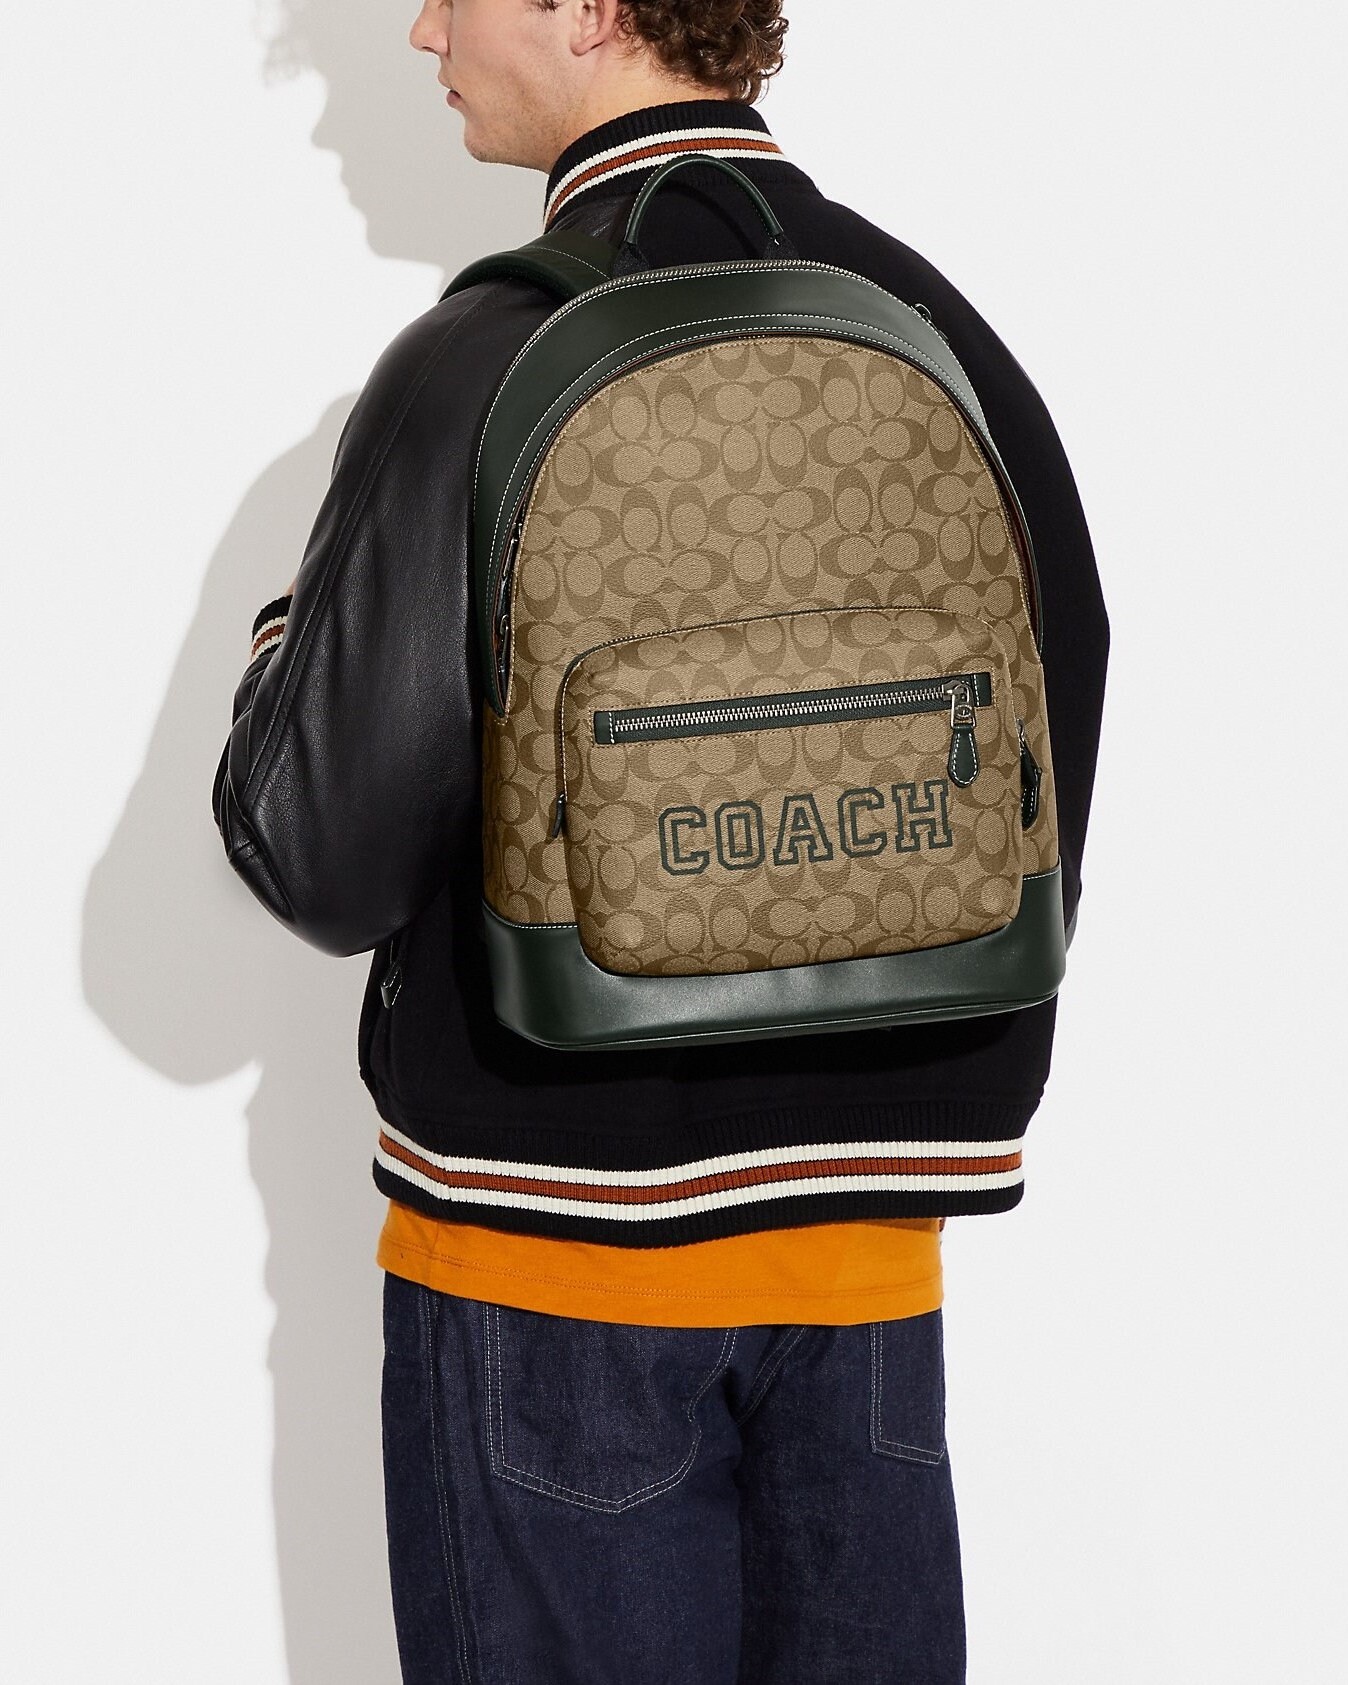 BALO COACH NAM SIZE LỚN WEST BACKPACK IN SIGNATURE CANVAS WITH VARSITY MOTIF CE717 1